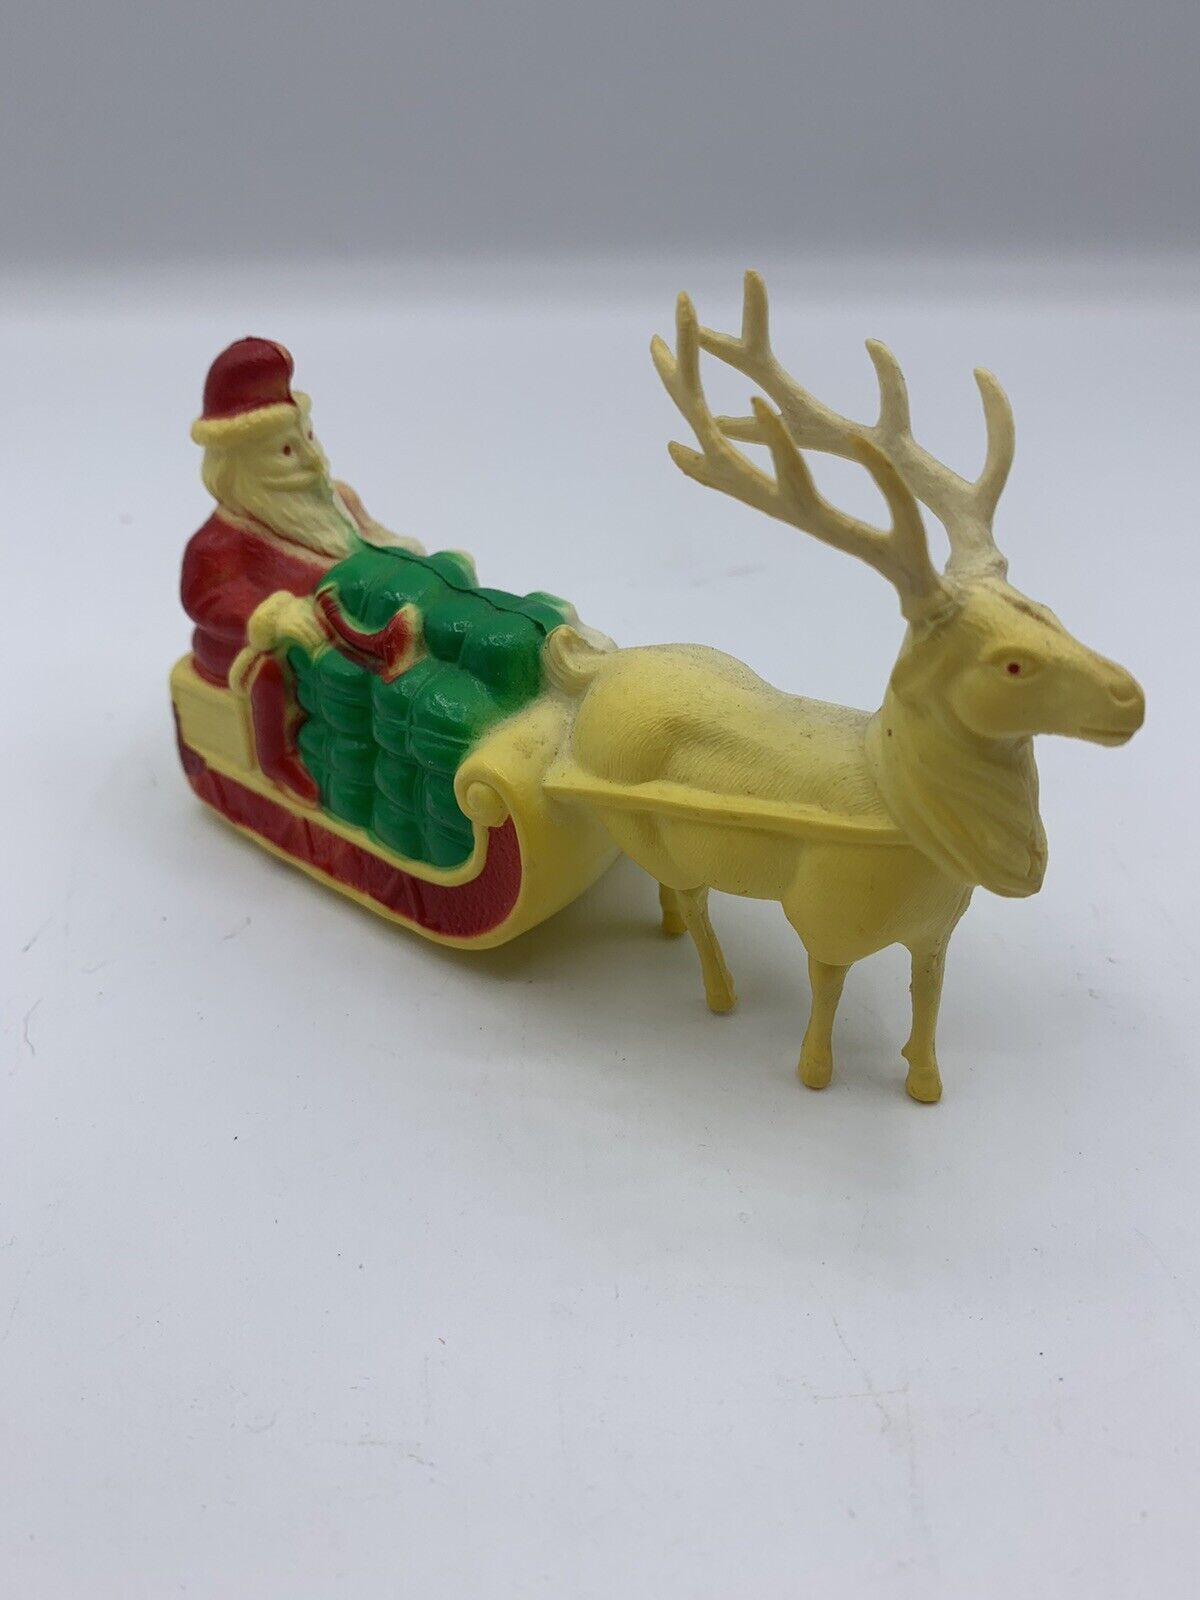 VINTAGE 1950s IRWIN CELLULOID SANTA ON SLED w/ GIFTS